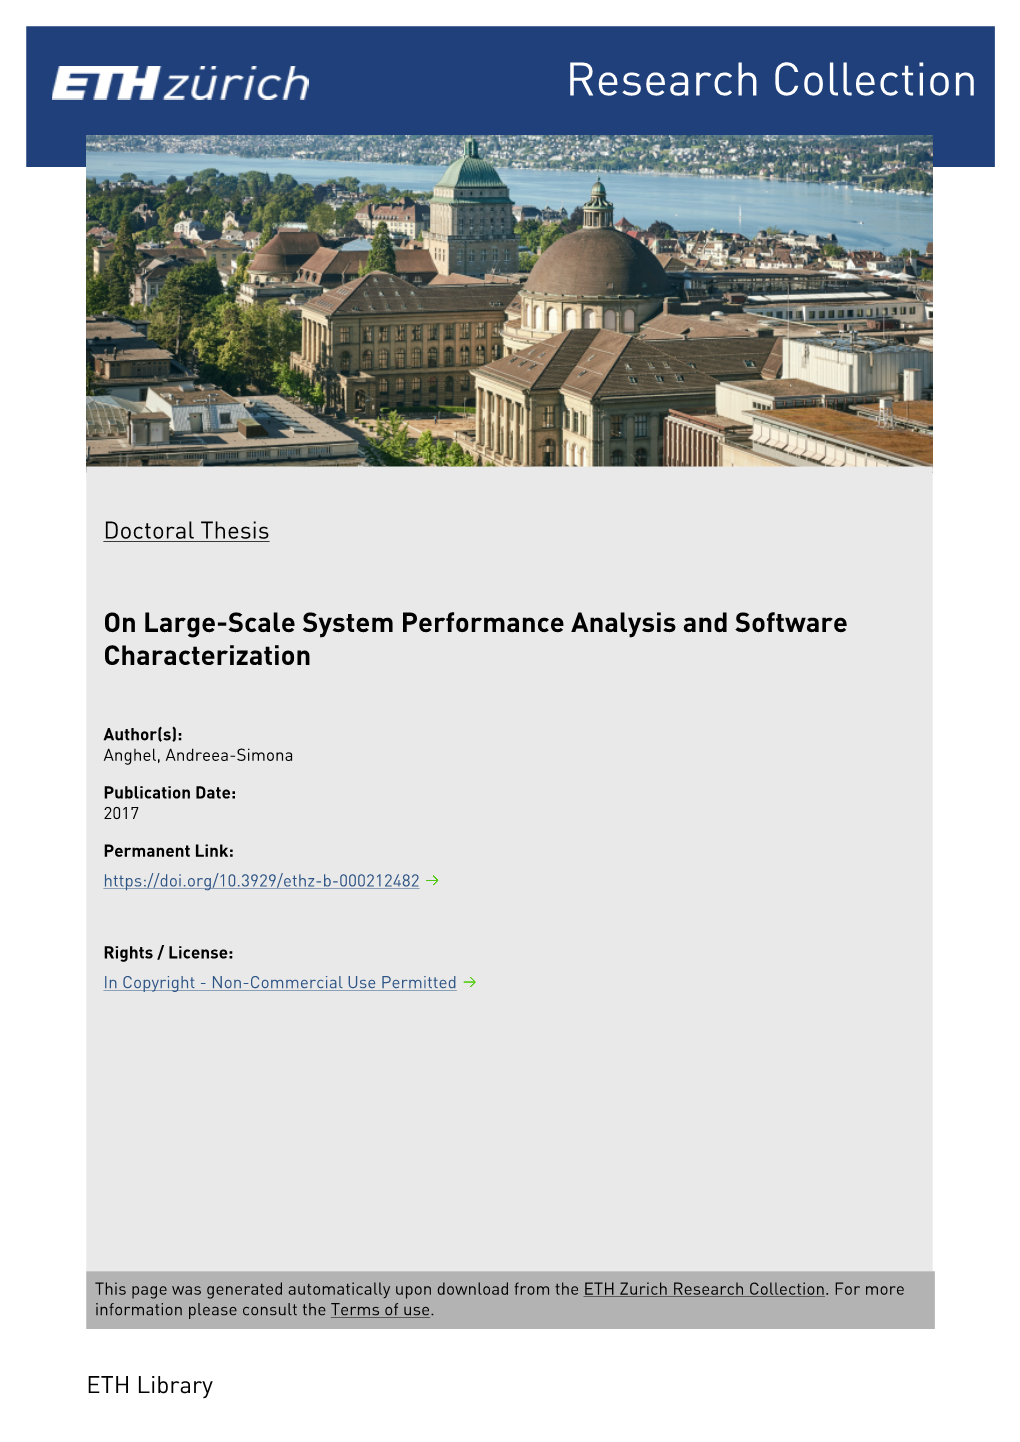 On Large-Scale System Performance Analysis and Software Characterization